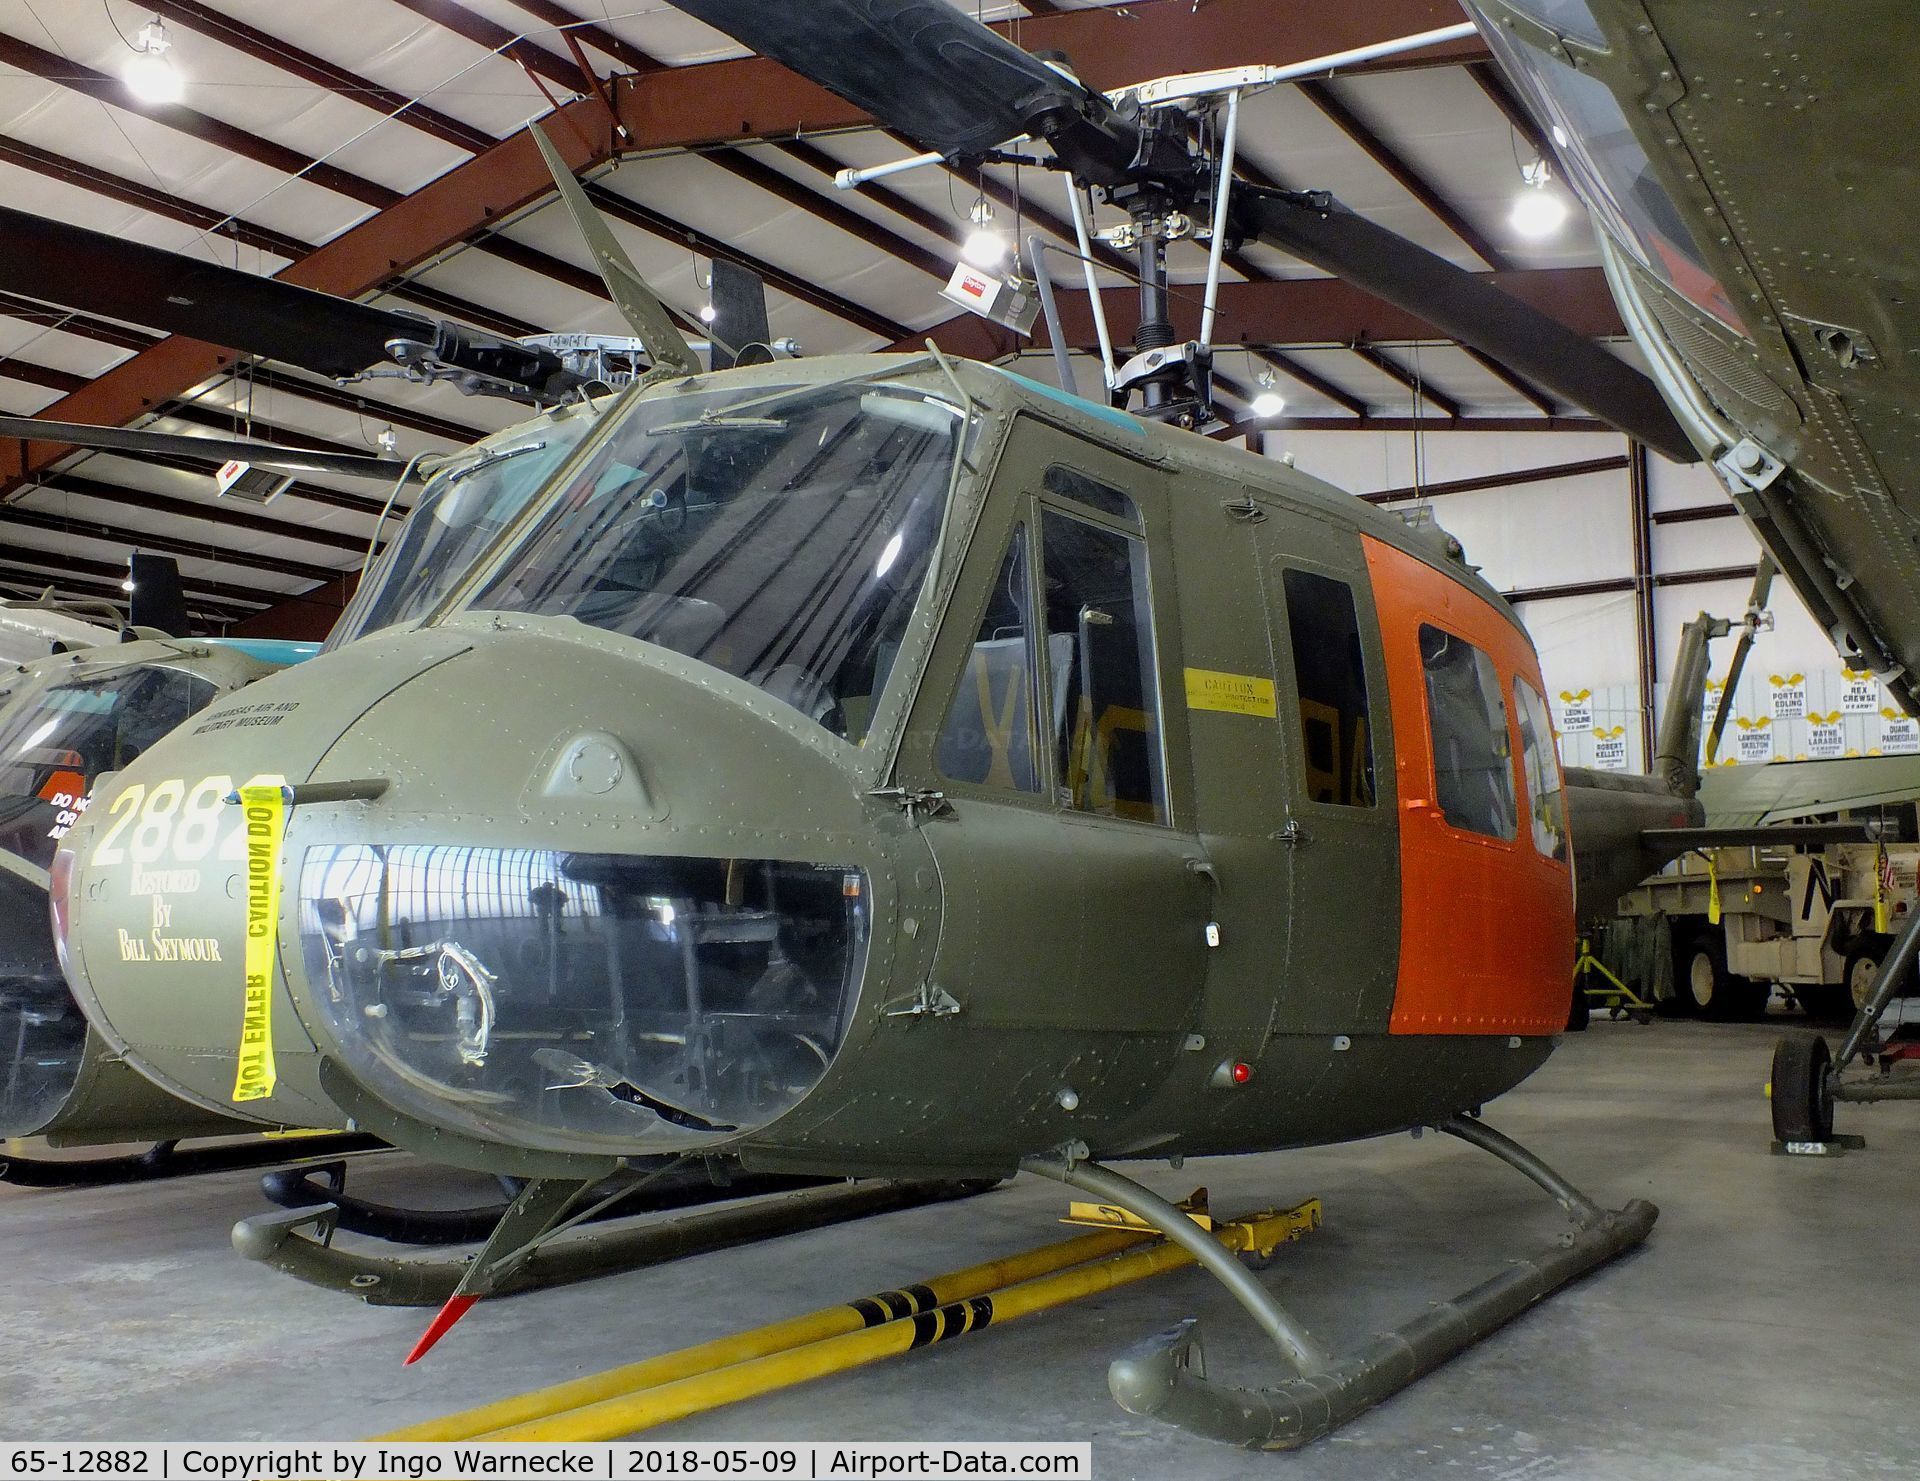 65-12882, 1965 Bell UH-1H Iroquois C/N 5215, Bell UH-1H Iroquois at the Arkansas Air & Military Museum, Fayetteville AR